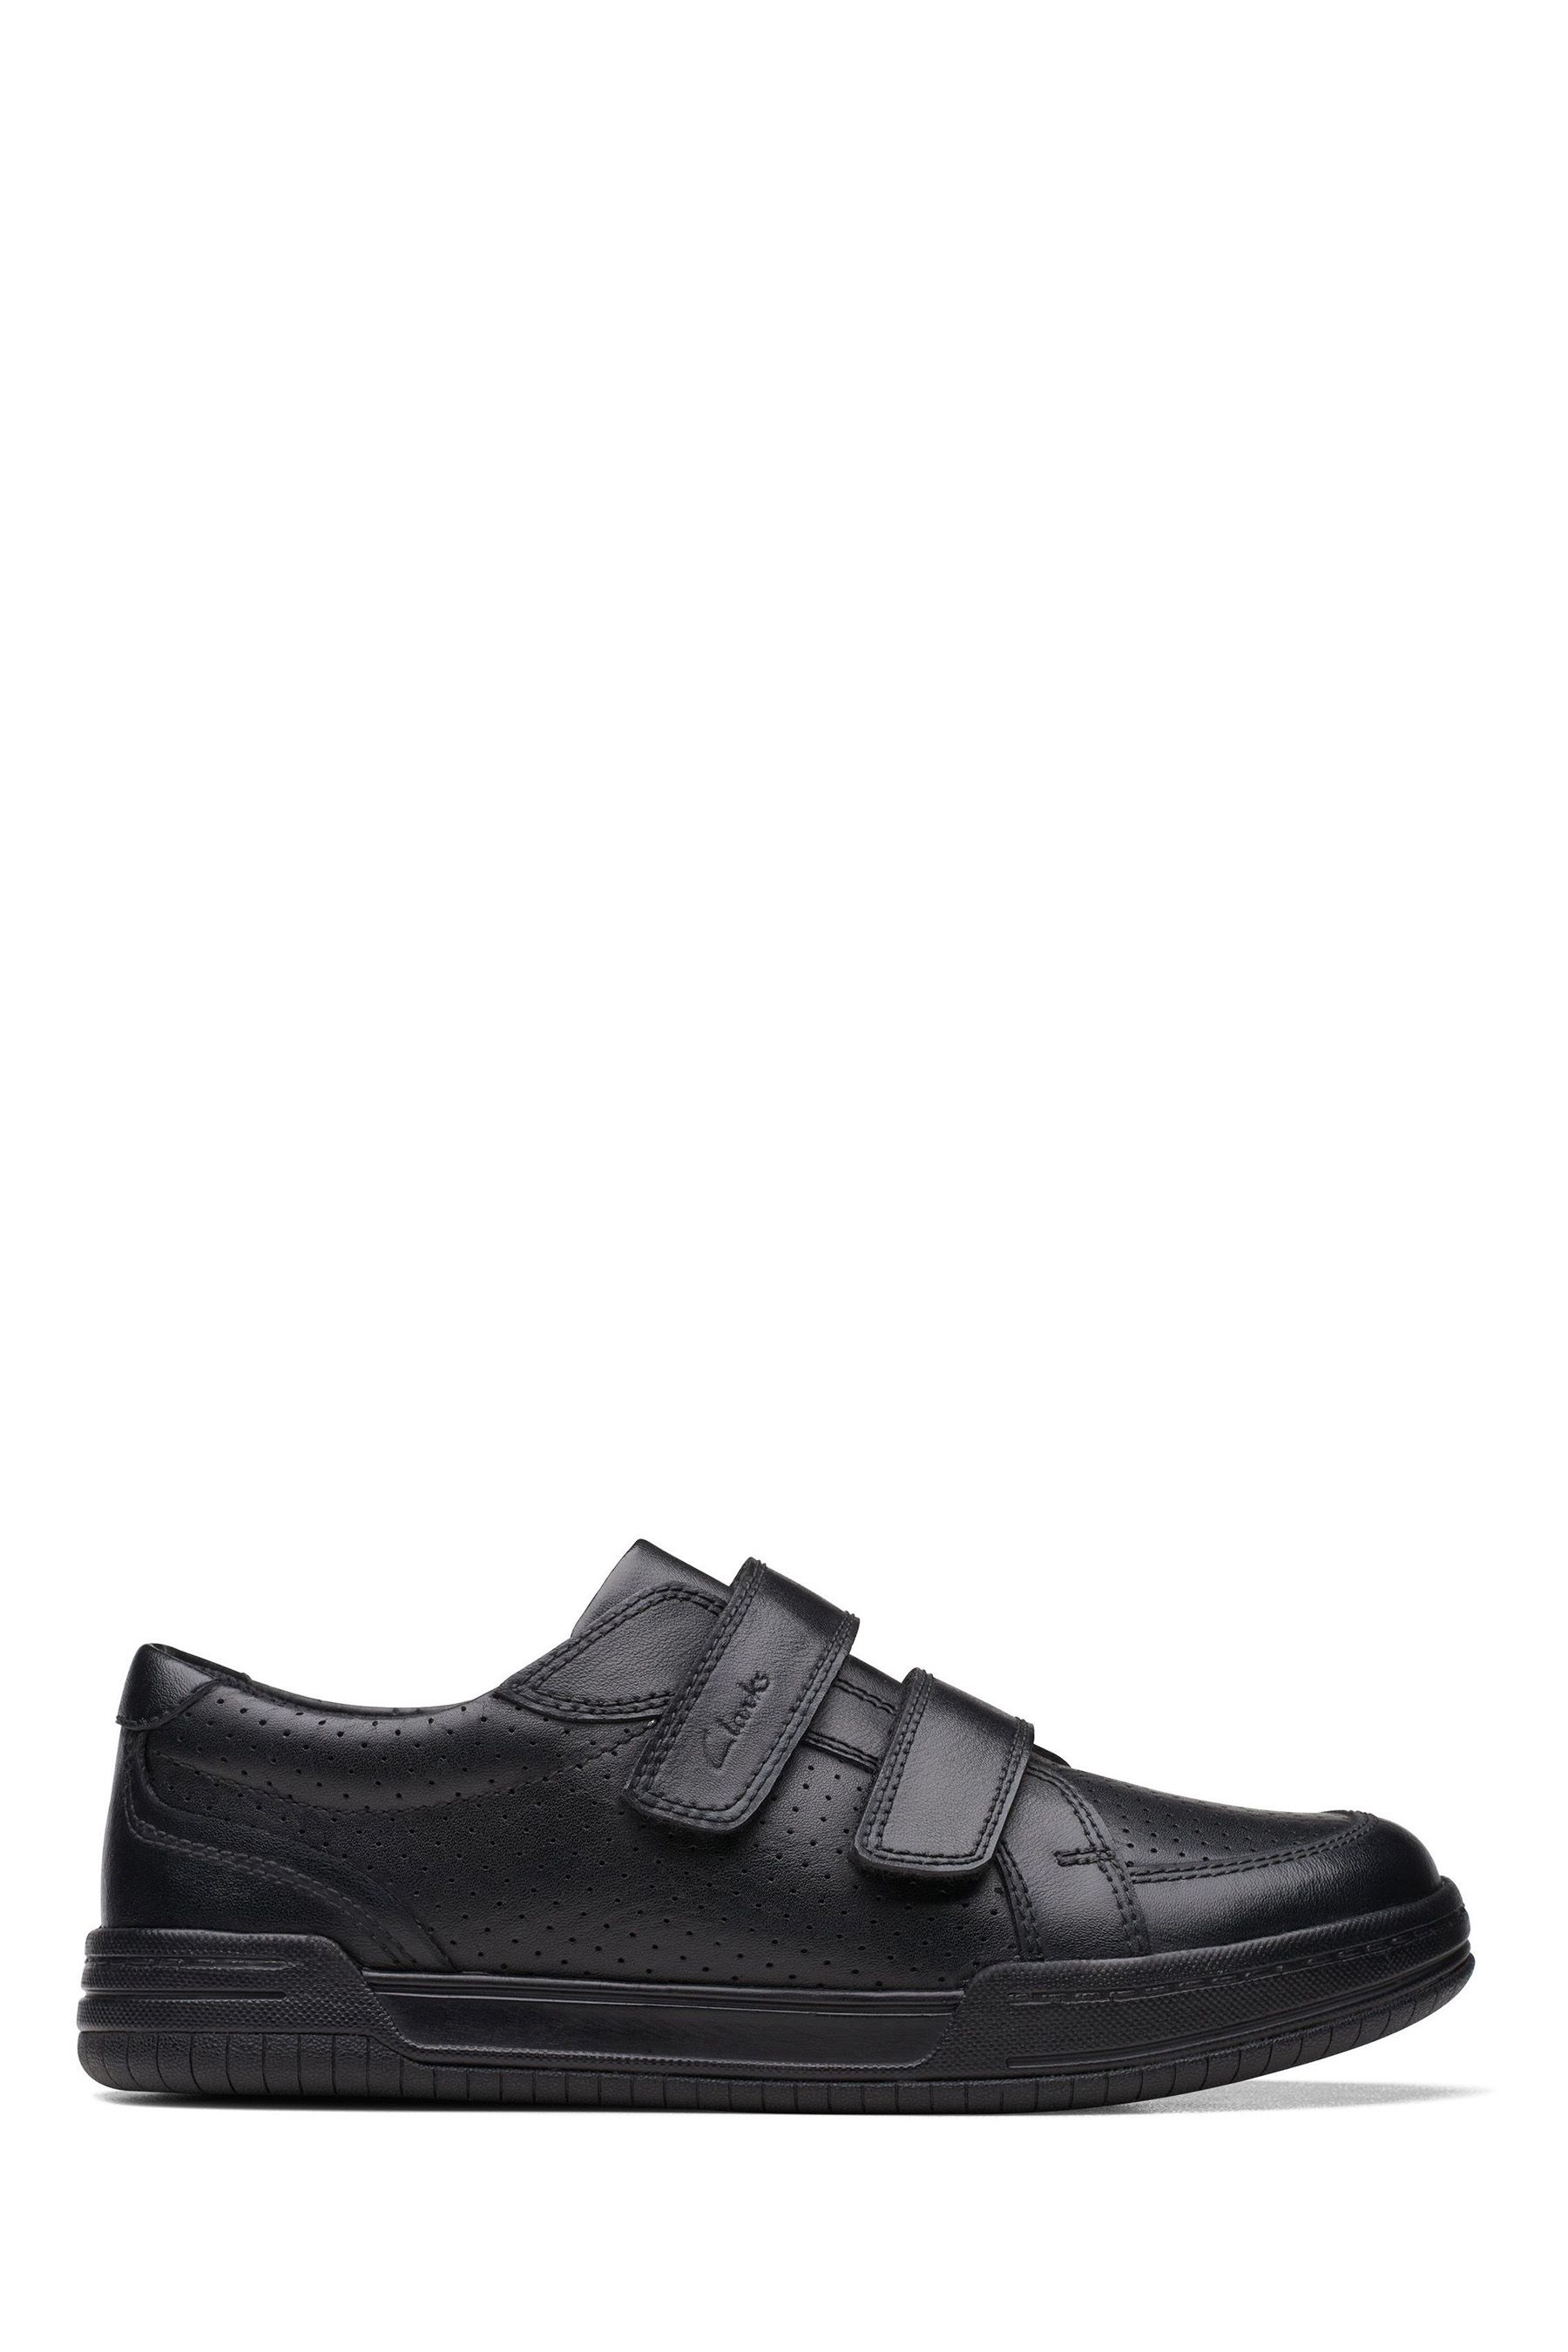 Buy Clarks Black Multi Fit Leather Fawn Strap Shoes from the Next UK ...